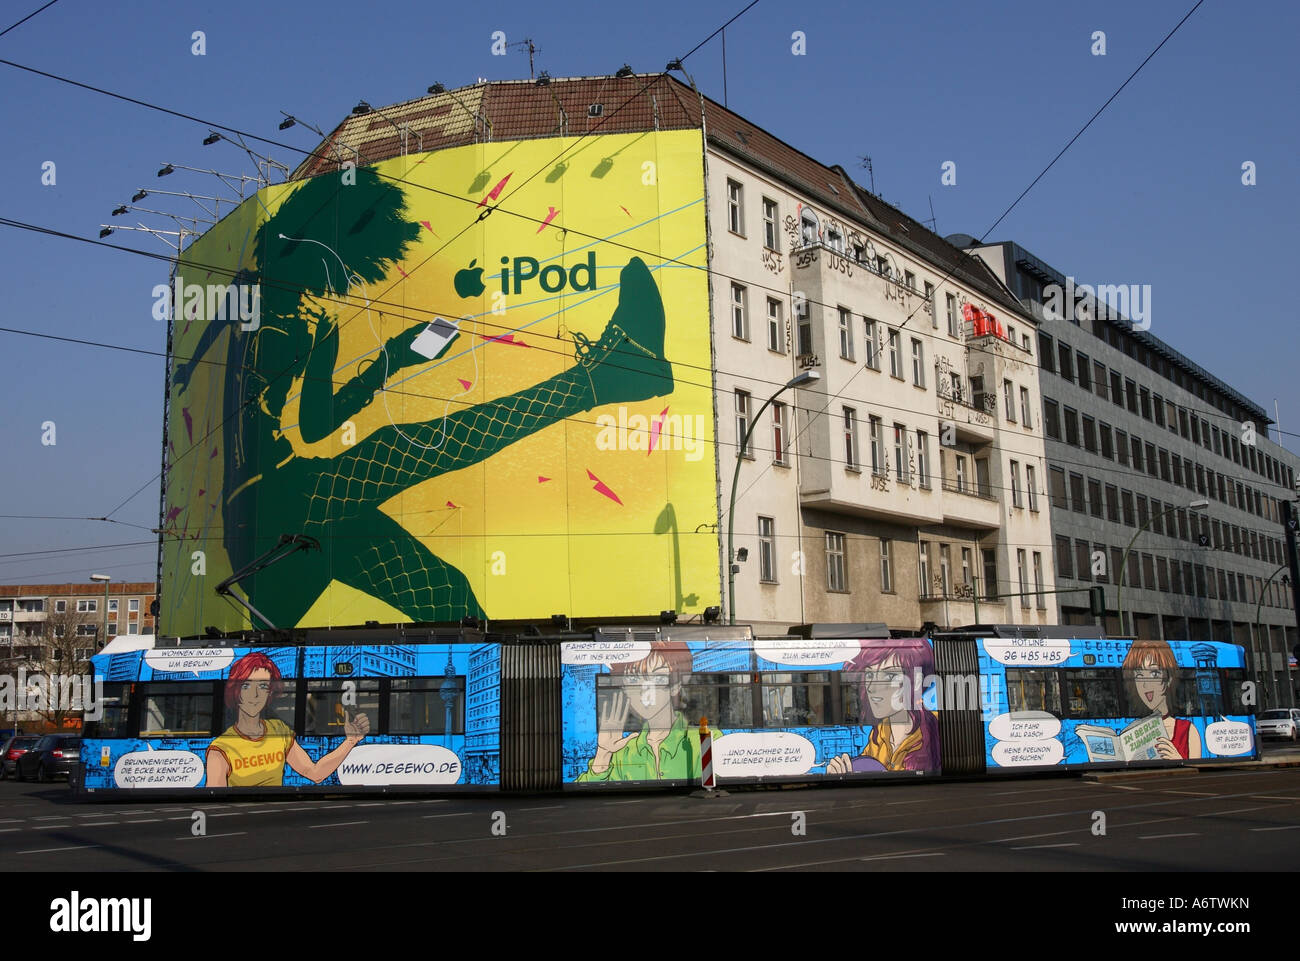 Colorful comic tram in front of huge advertisement banner that promotes apples ipod on abuilding facade in Berlin, Germany, Eur Stock Photo